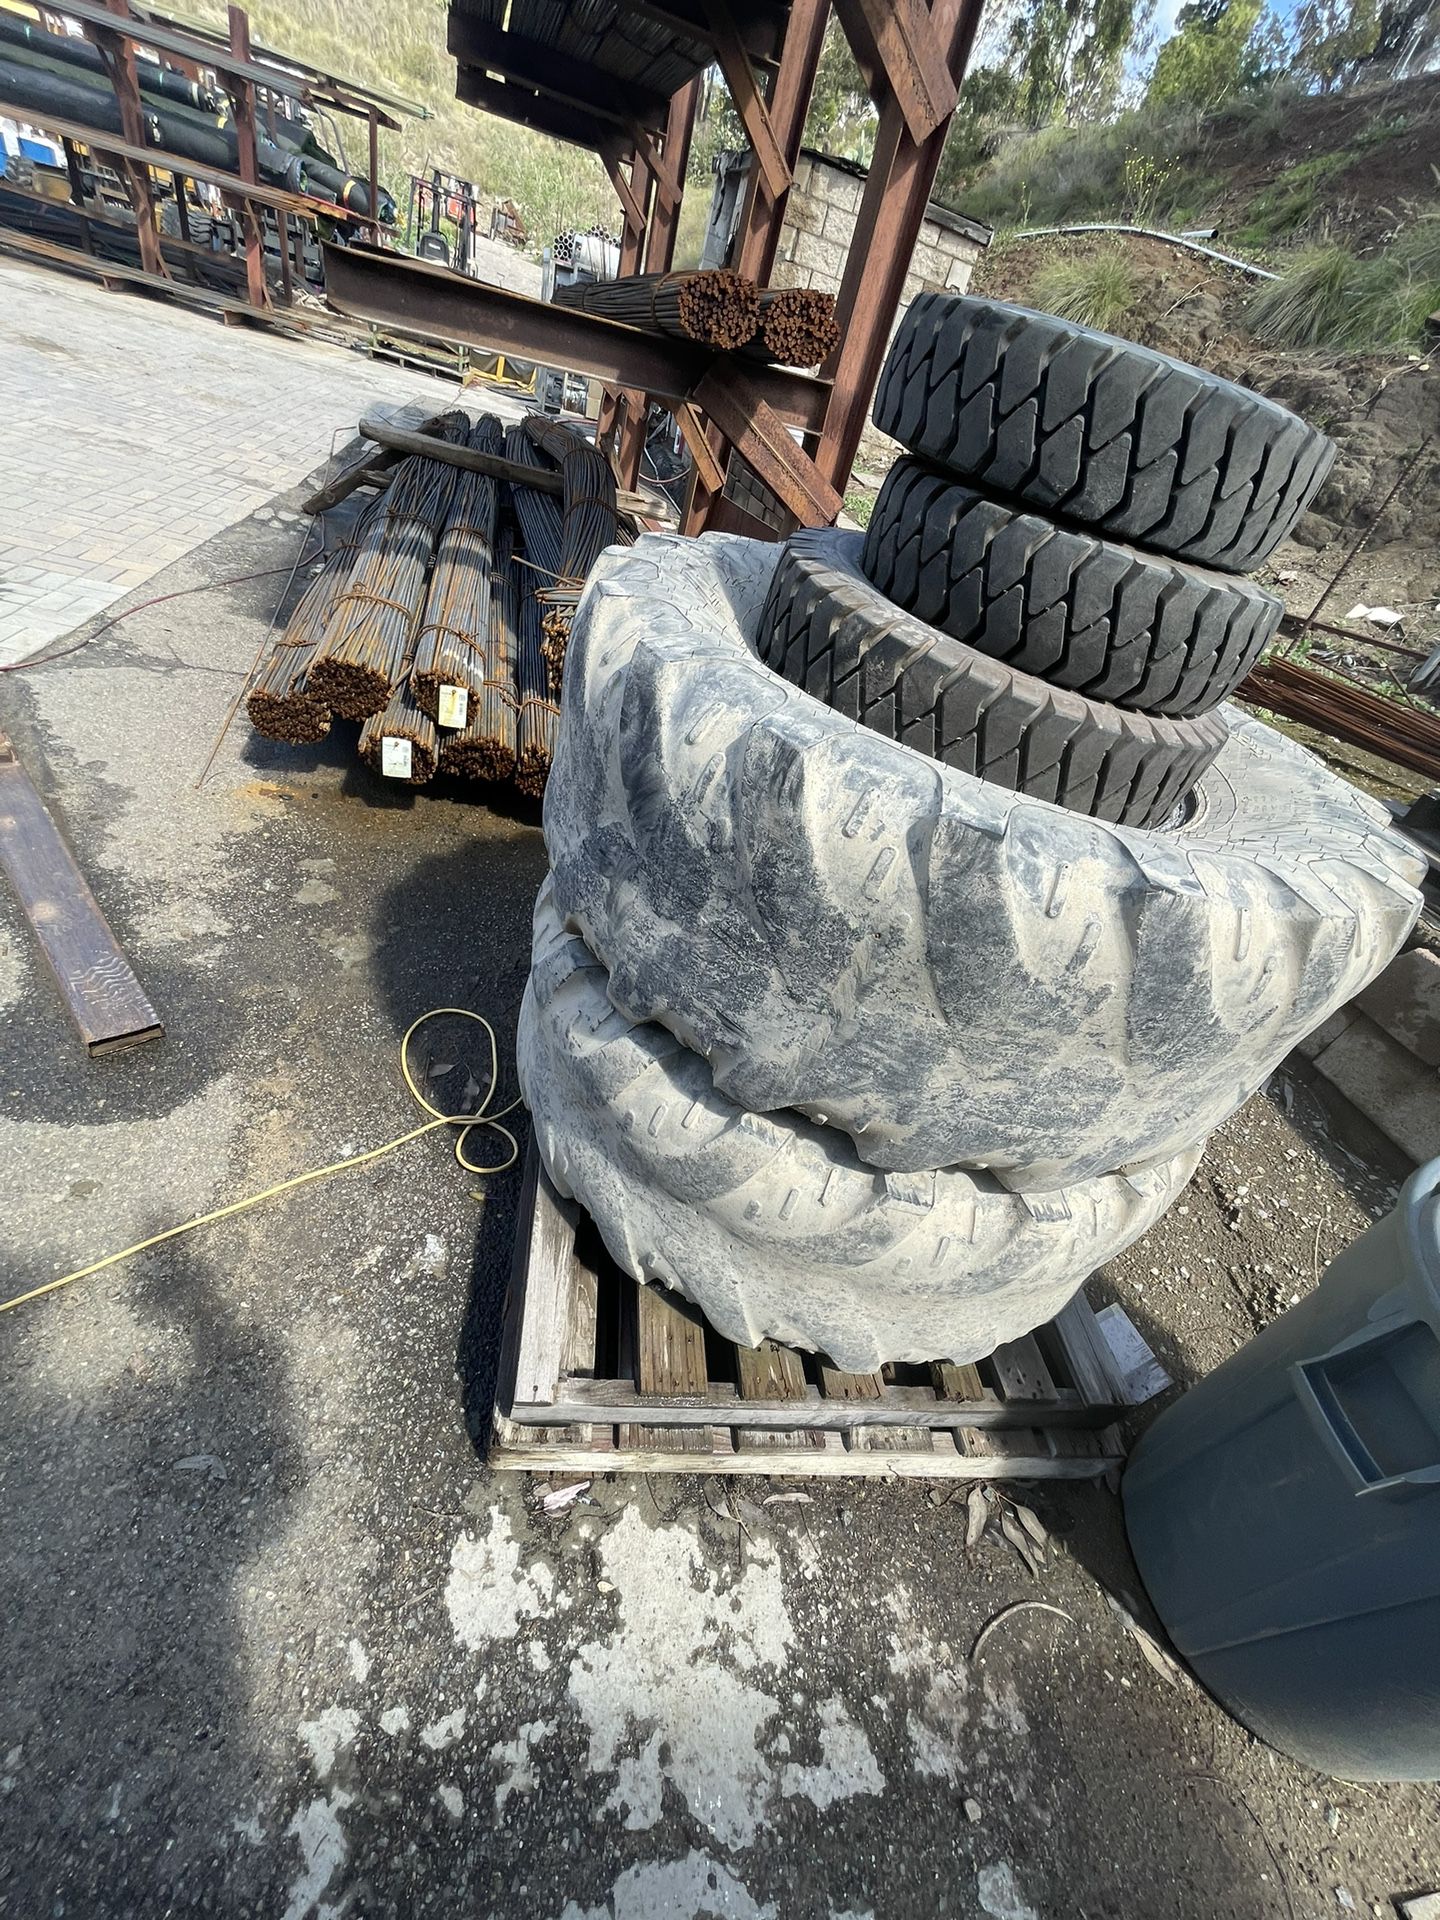 Tractor And Forklift Tires